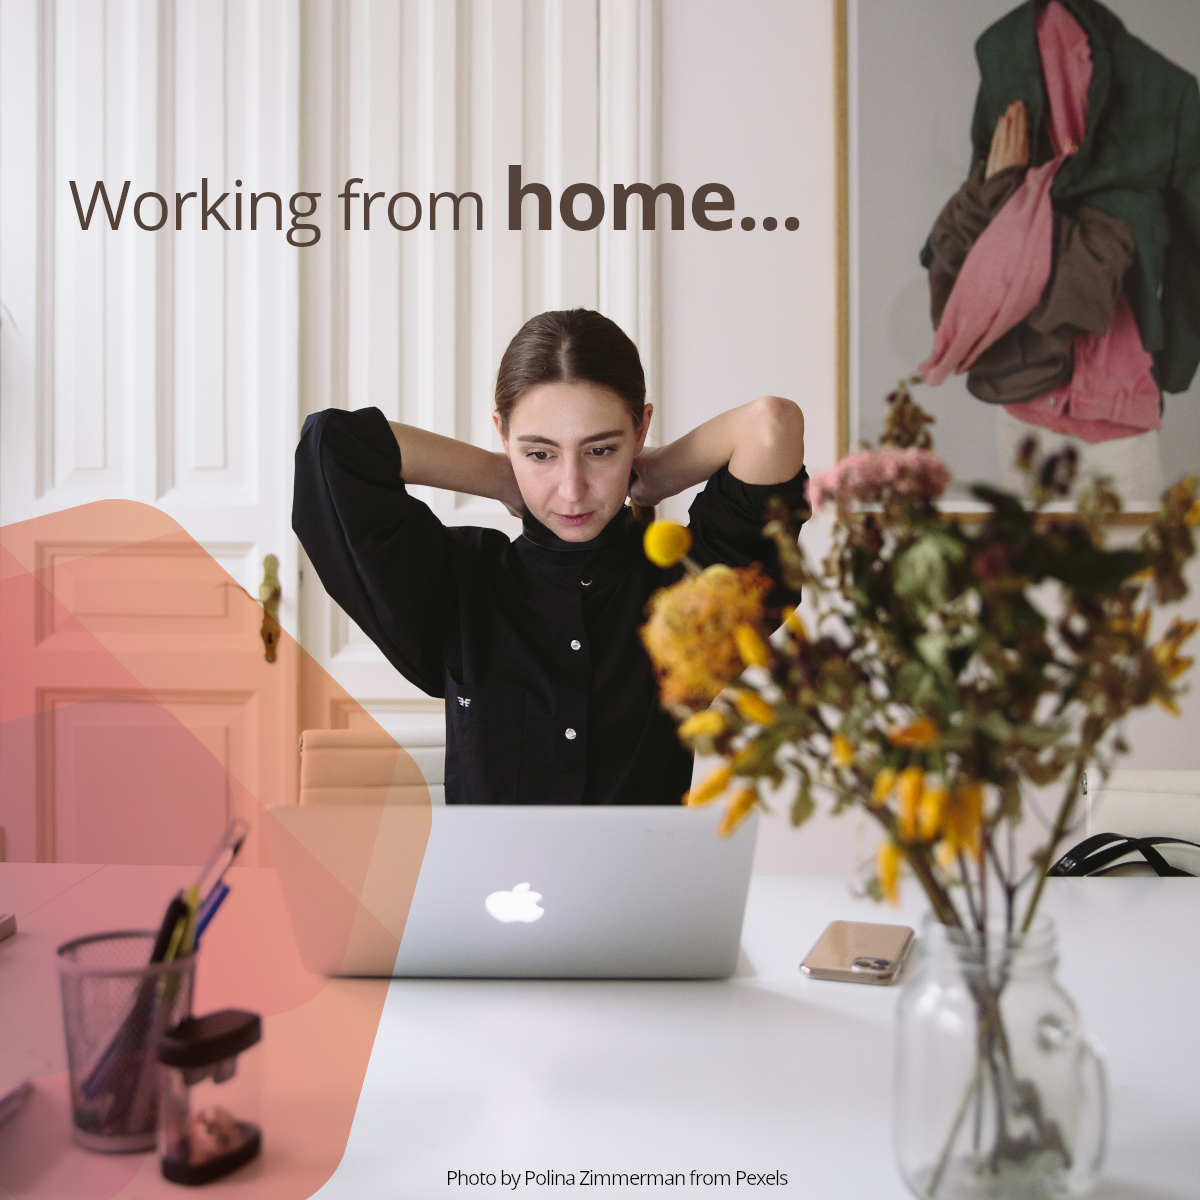 claiming-deductions-for-working-at-home-reminder-factor1-accountants